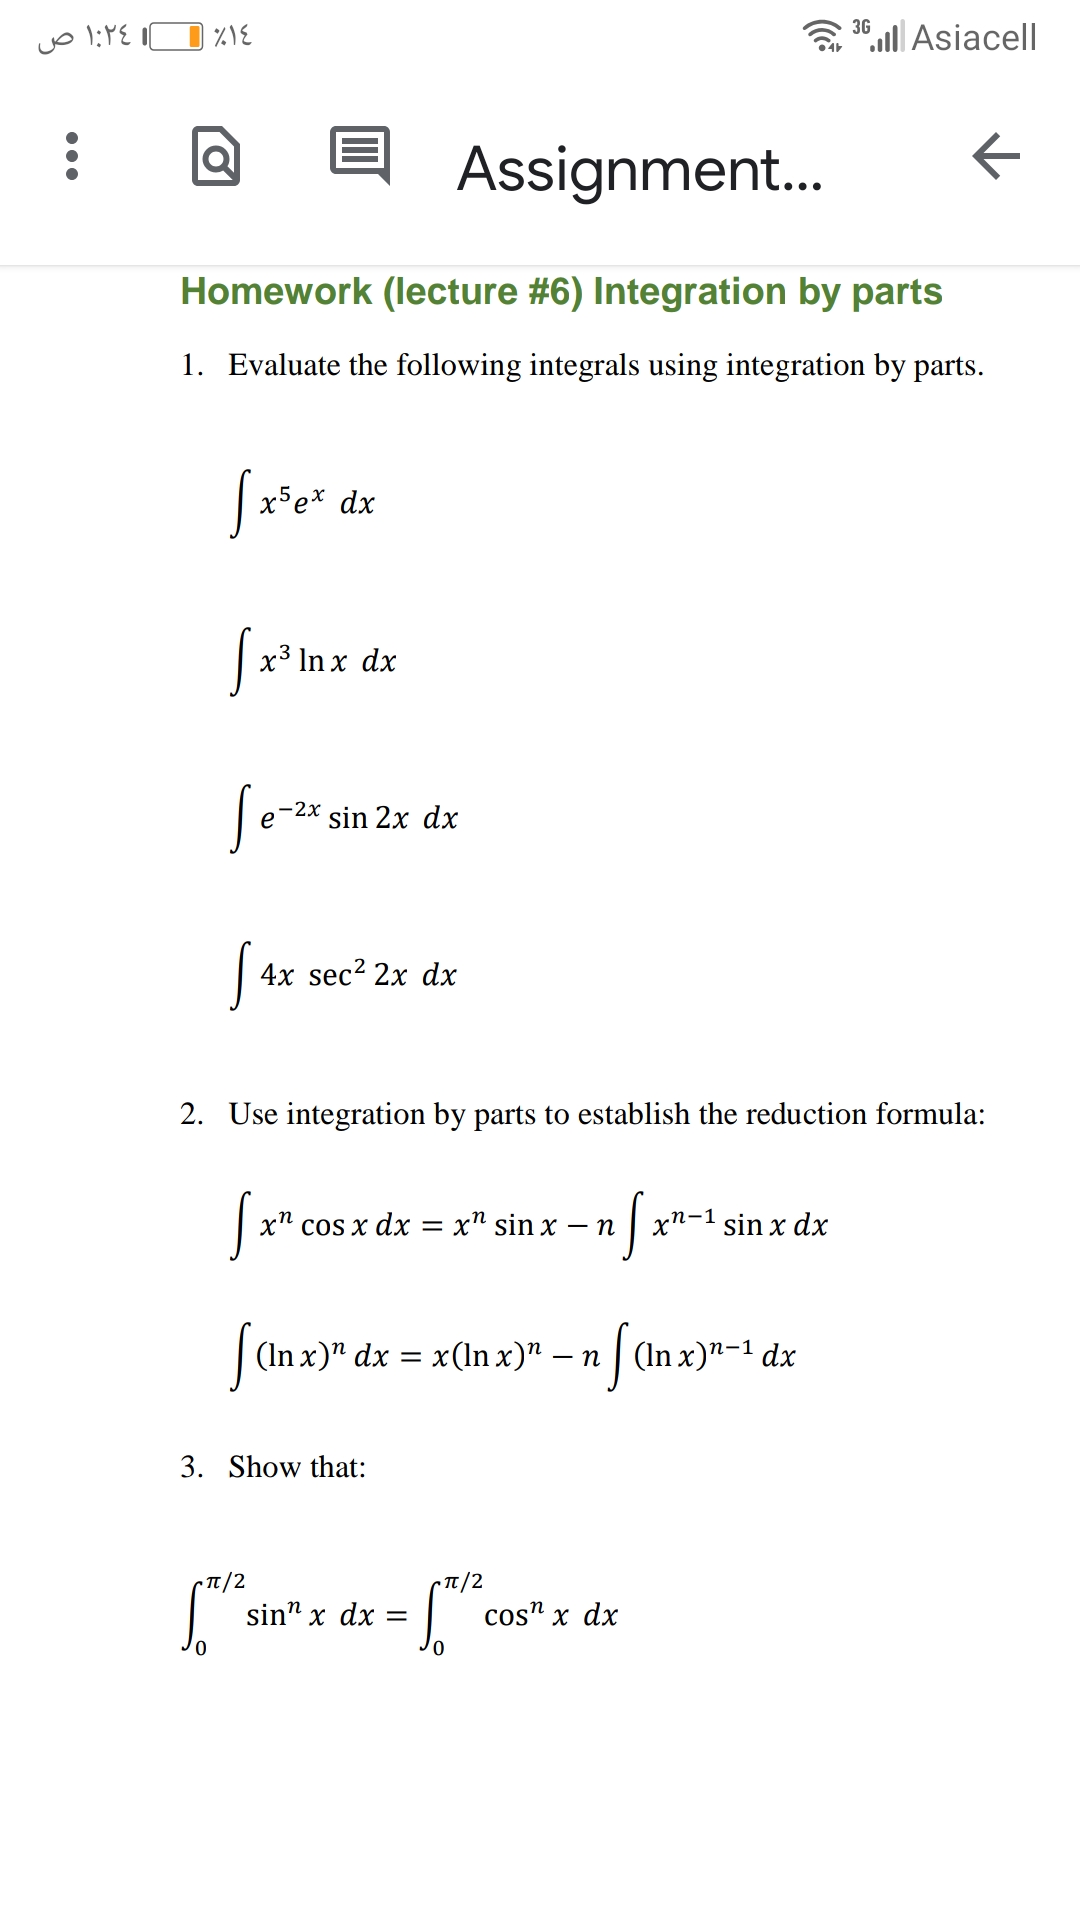 1. Evaluate the following integrals using integration by parts.
x5e* dx
